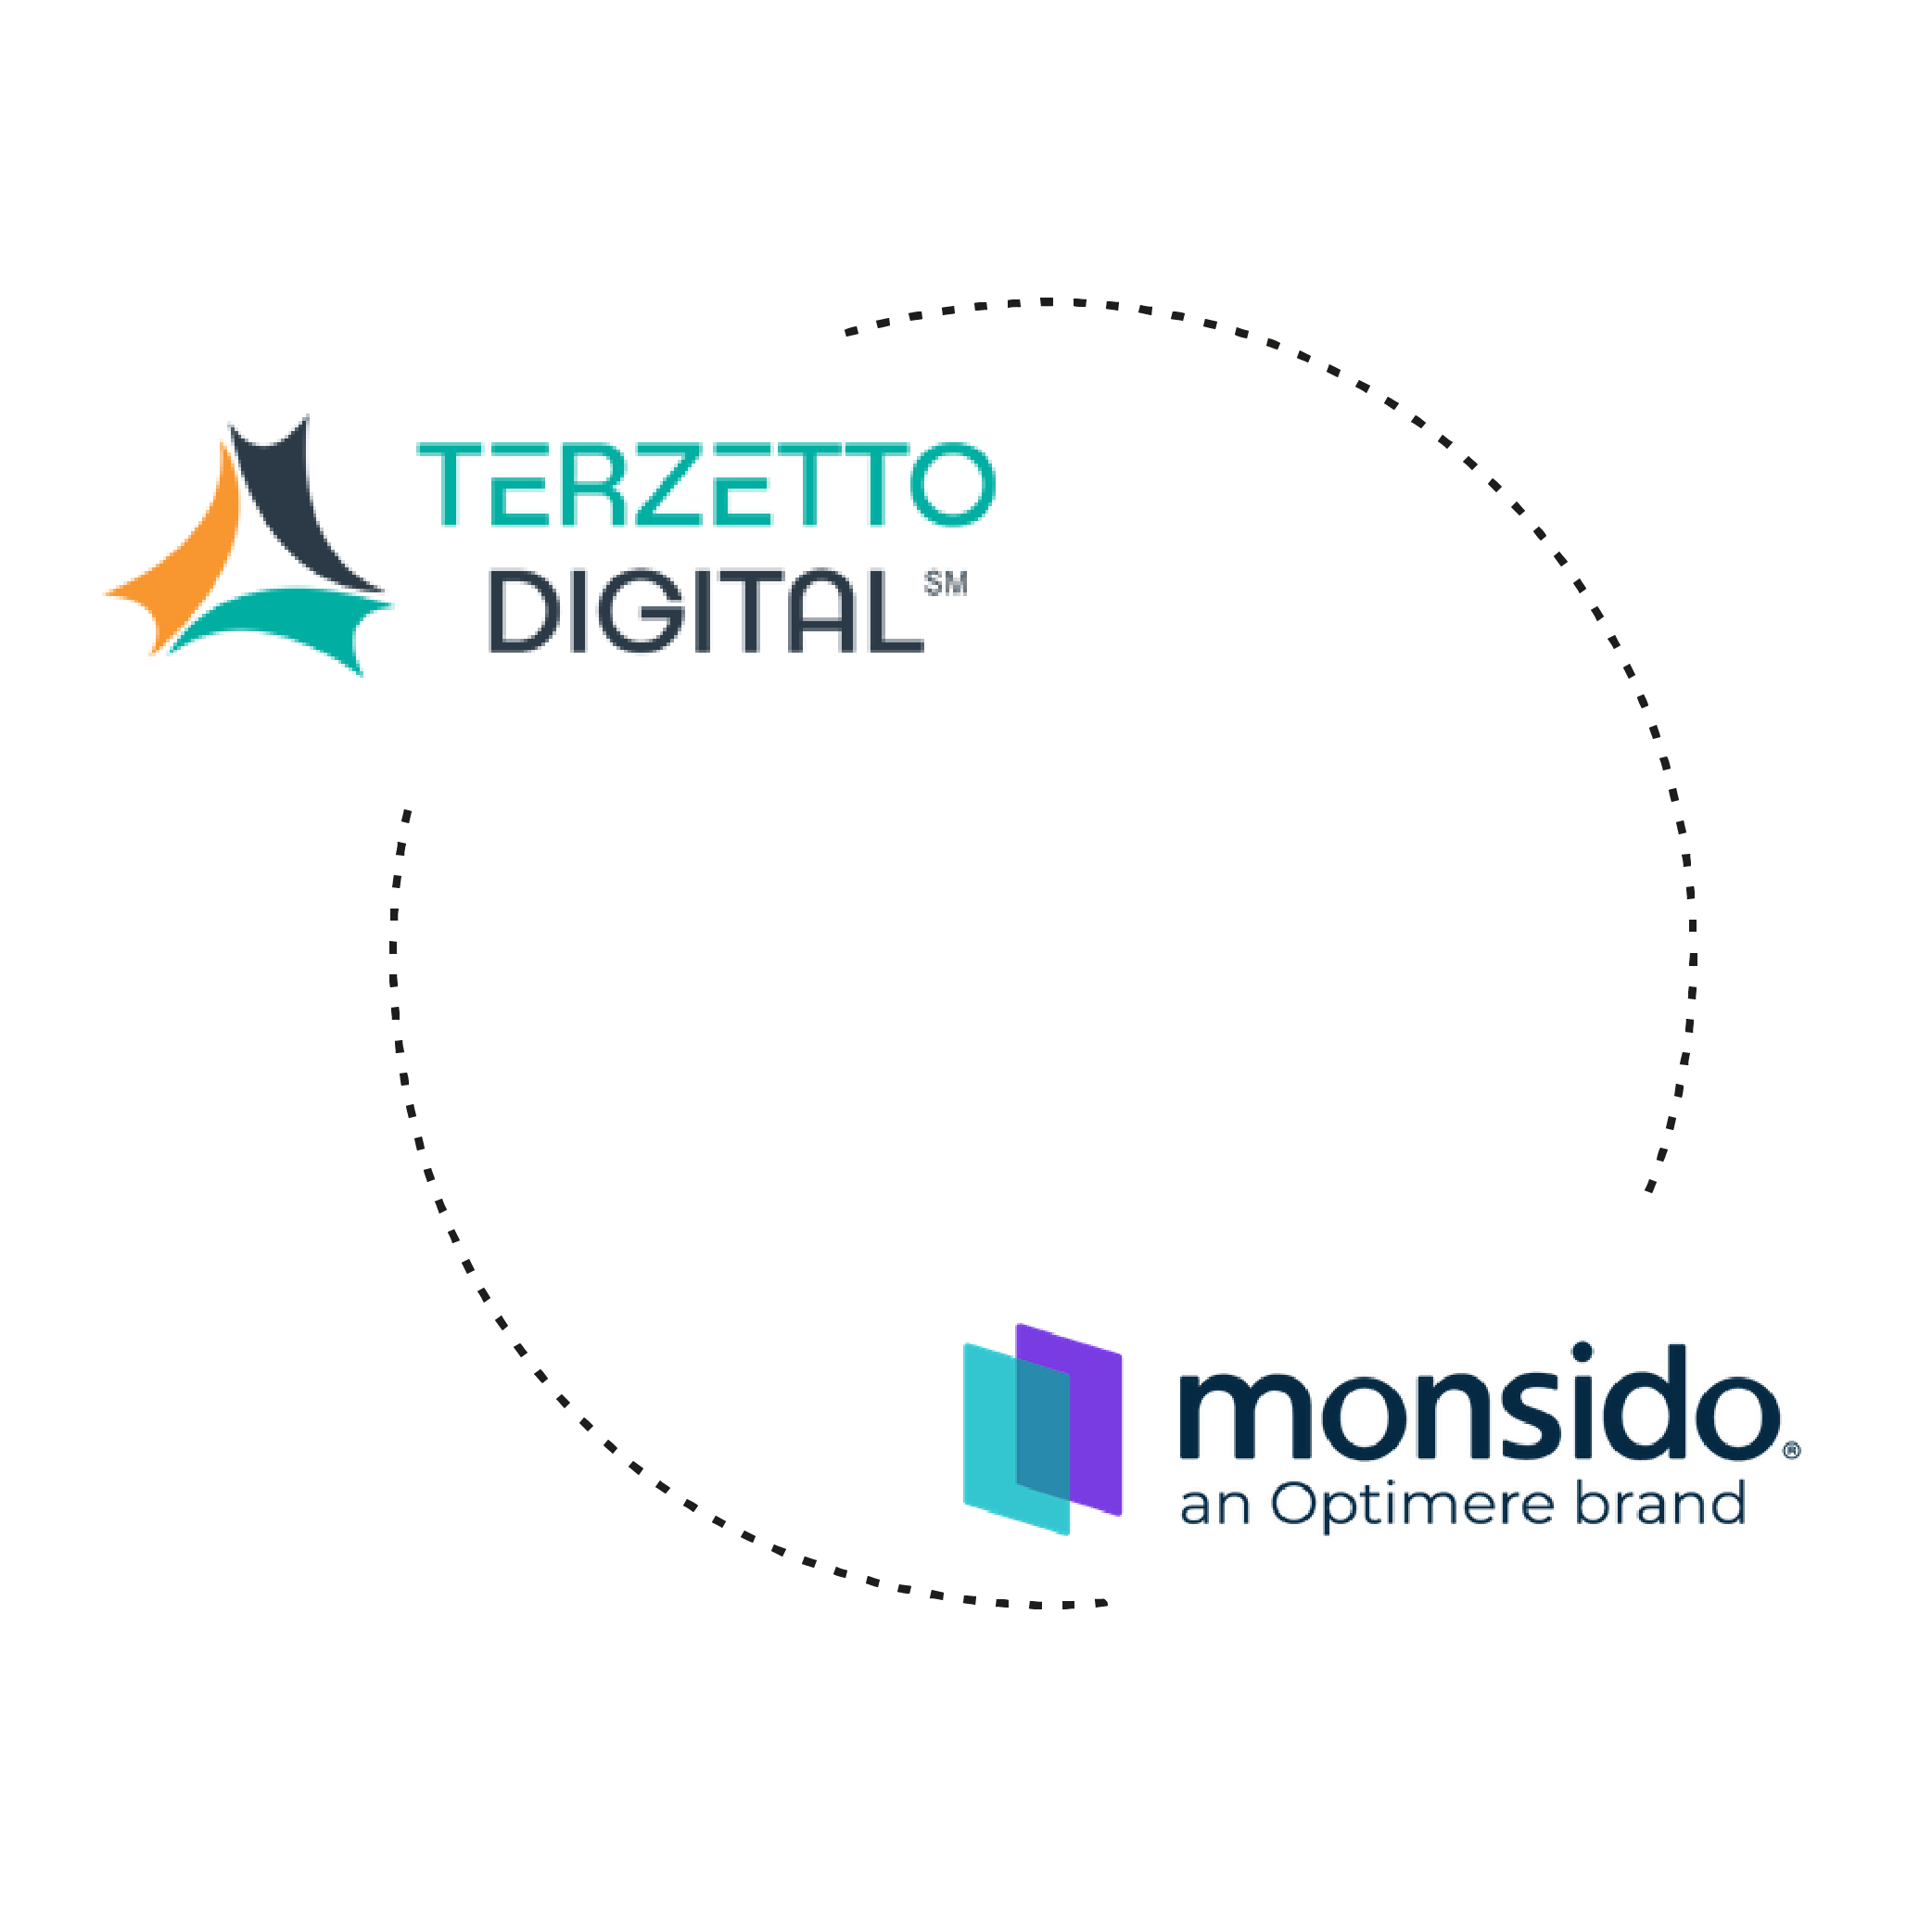 The Terzetto Digital logo and Monsido - an Optimere brand logo connected via dotted line circle